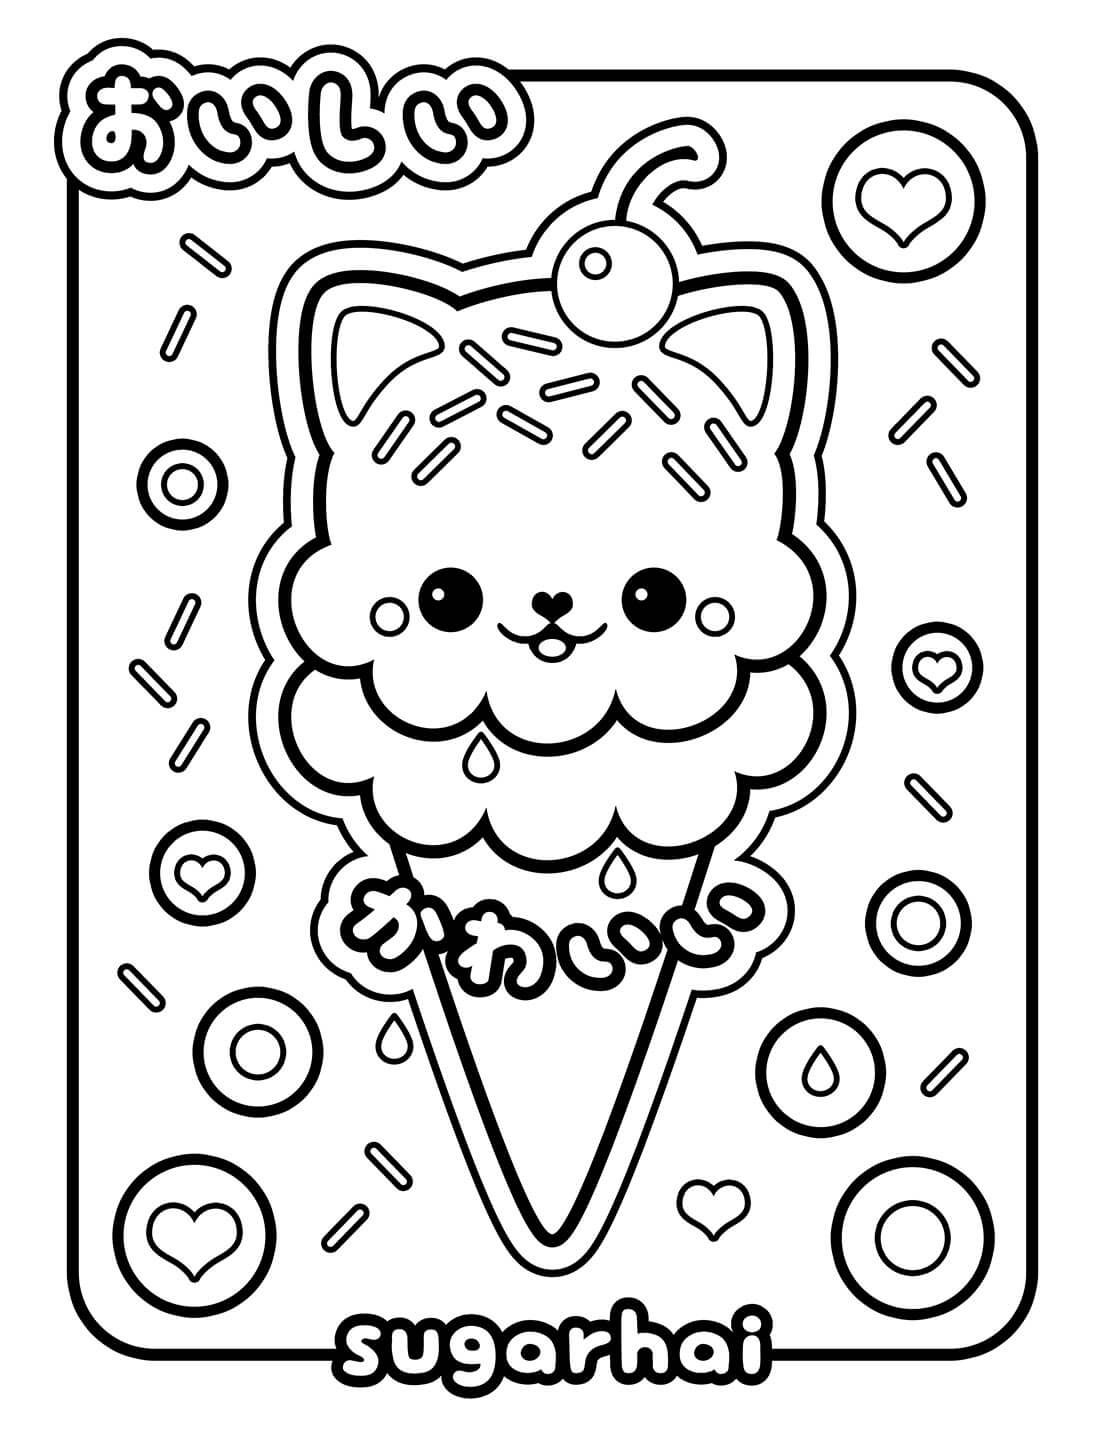 Kawaii Ice Cream Coloring Page - Free Printable Coloring Pages for Kids